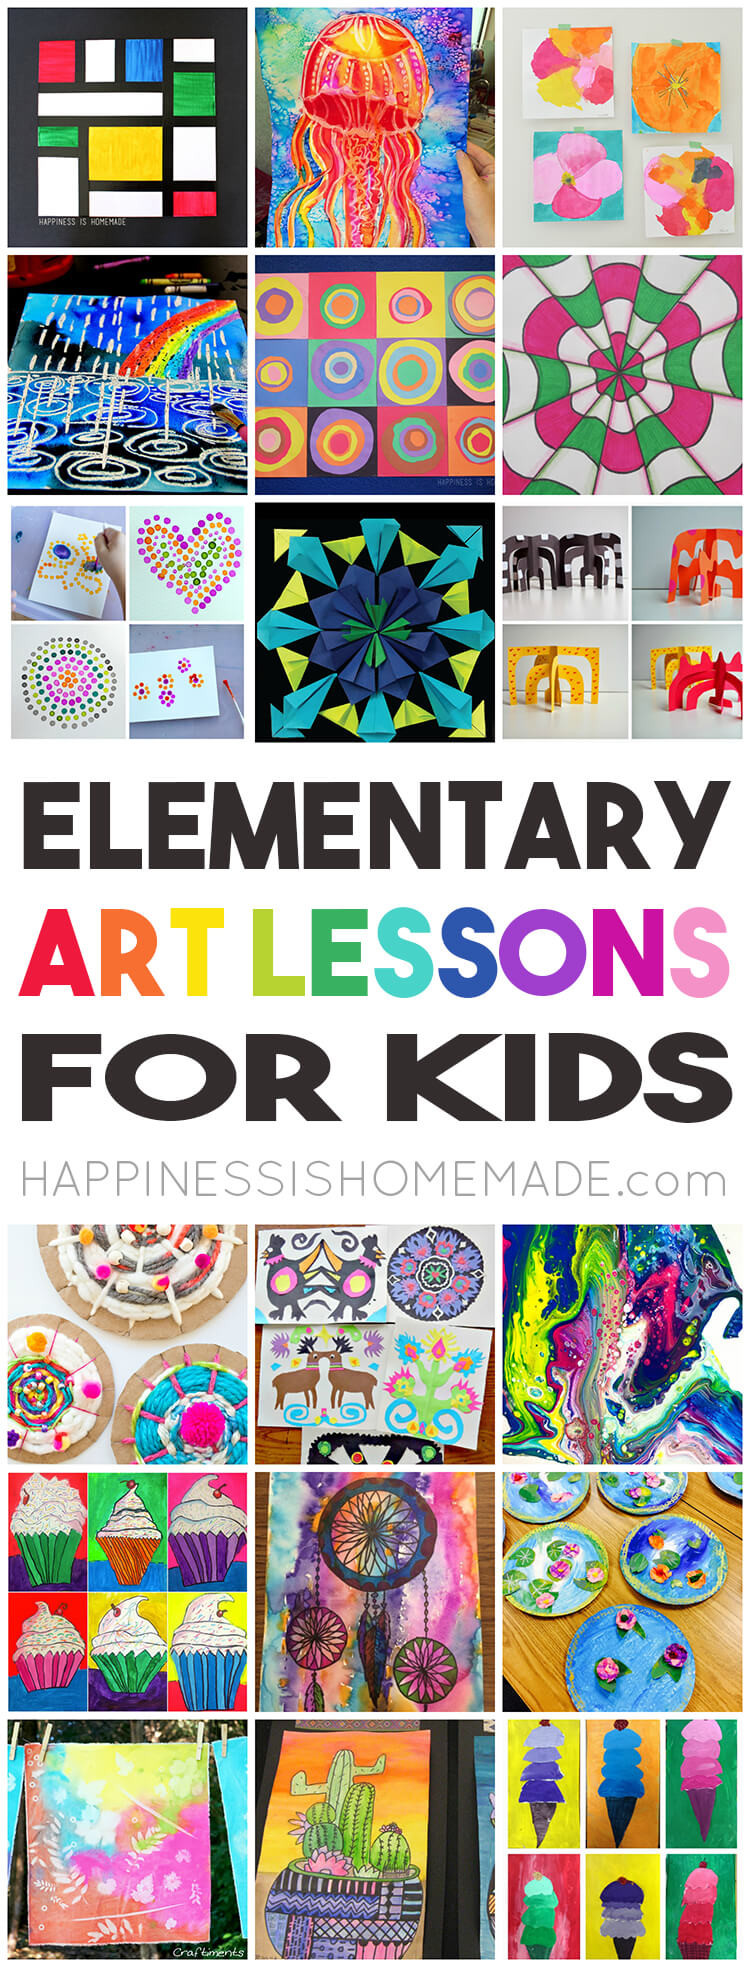 Art Class Ideas For Kids
 36 Elementary Art Lessons for Kids Happiness is Homemade